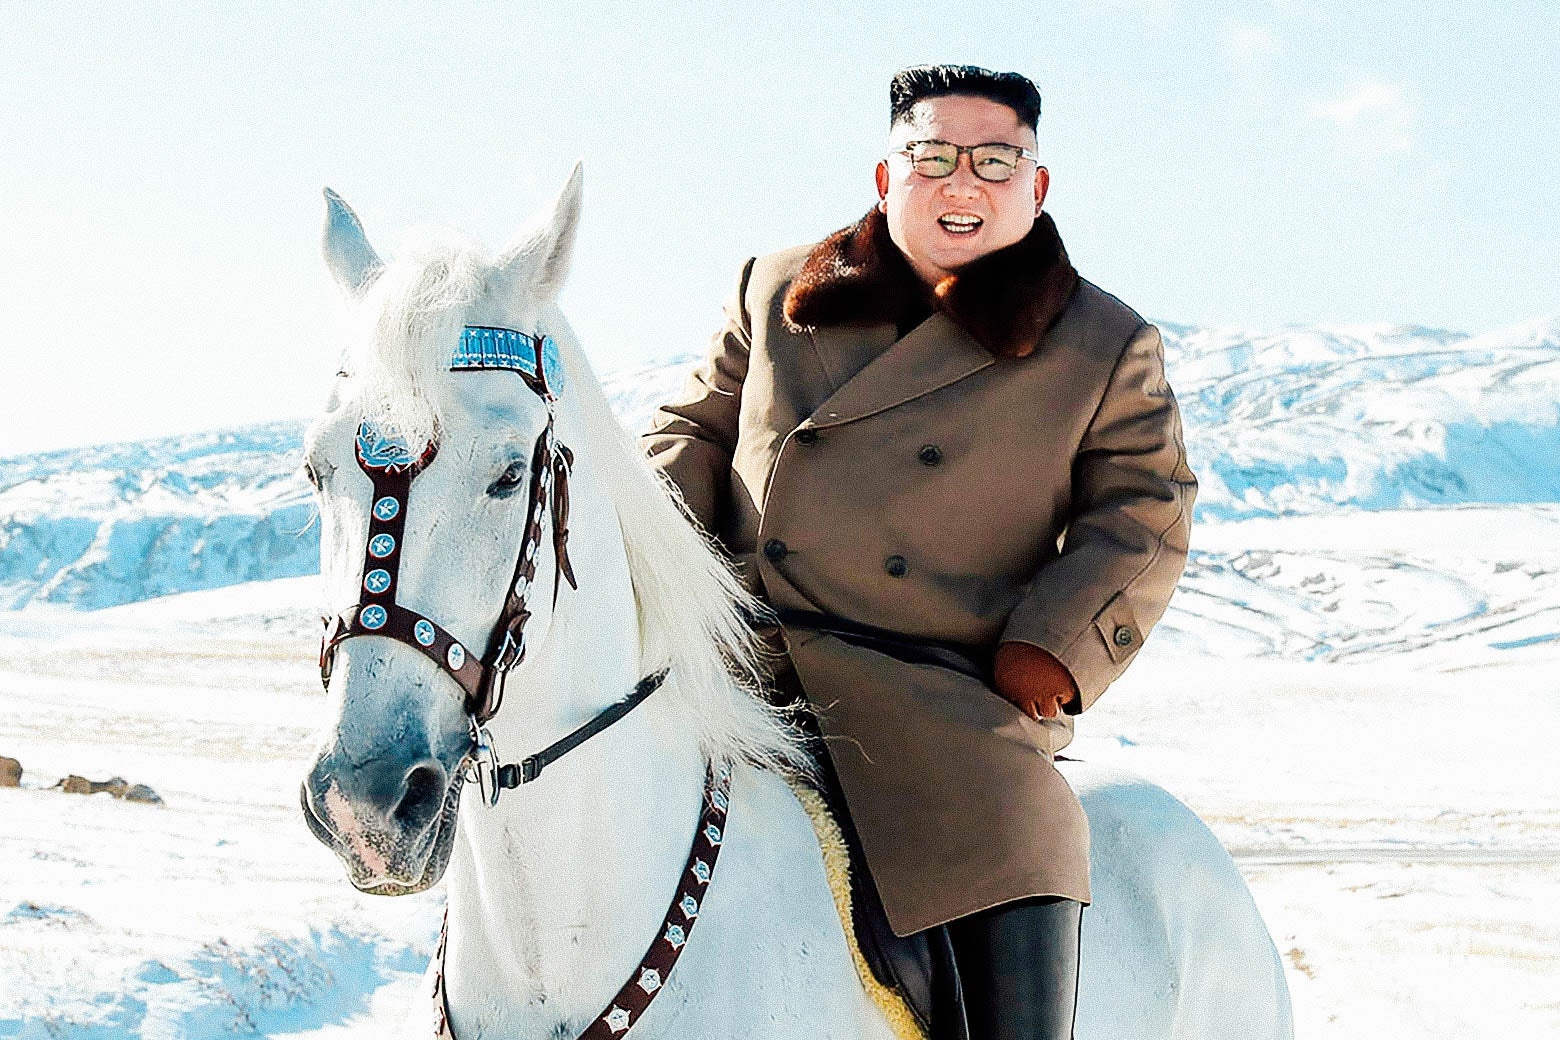 Kim grinning, astride a white horse, with snow-capped mountains in the background.